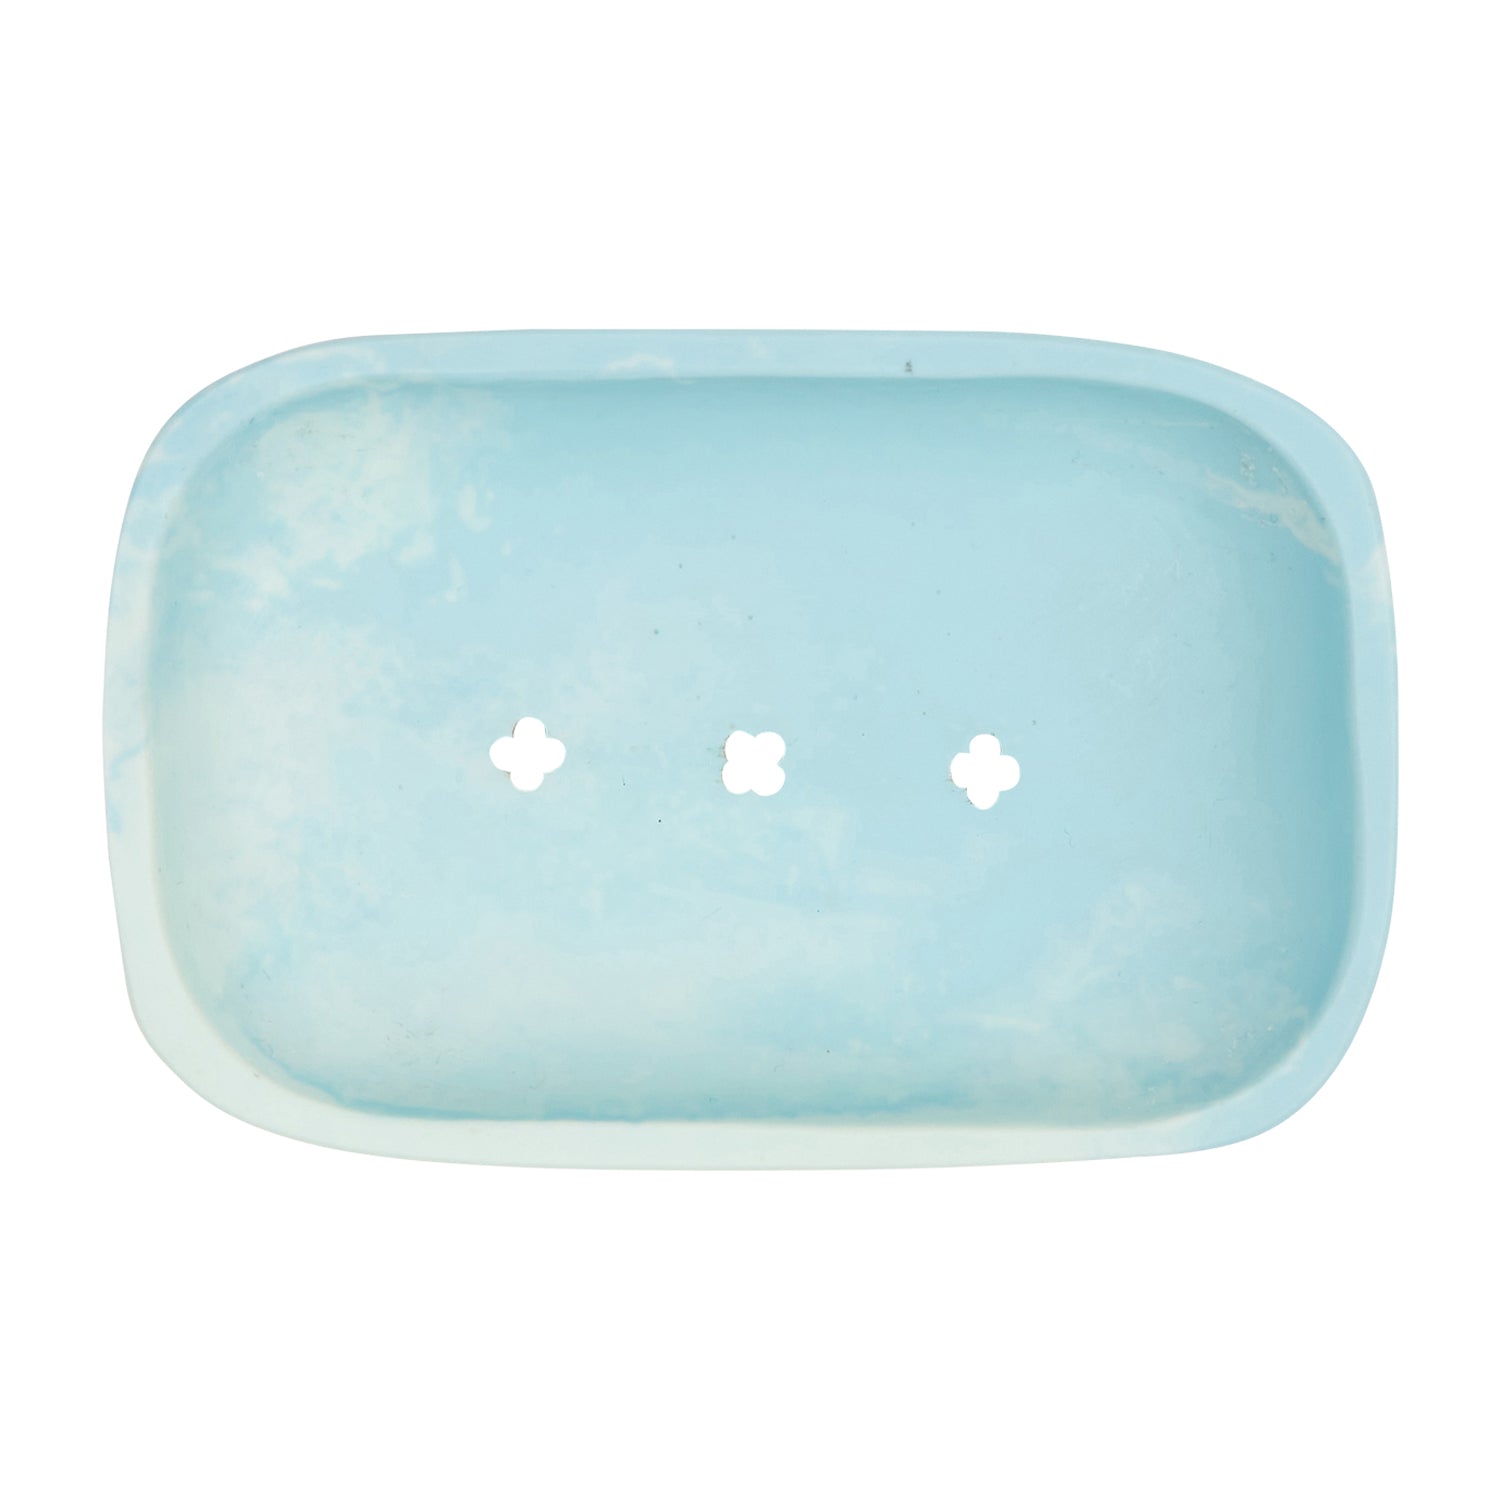 Sage and Clare - Daja Soap Dish - Spearmint